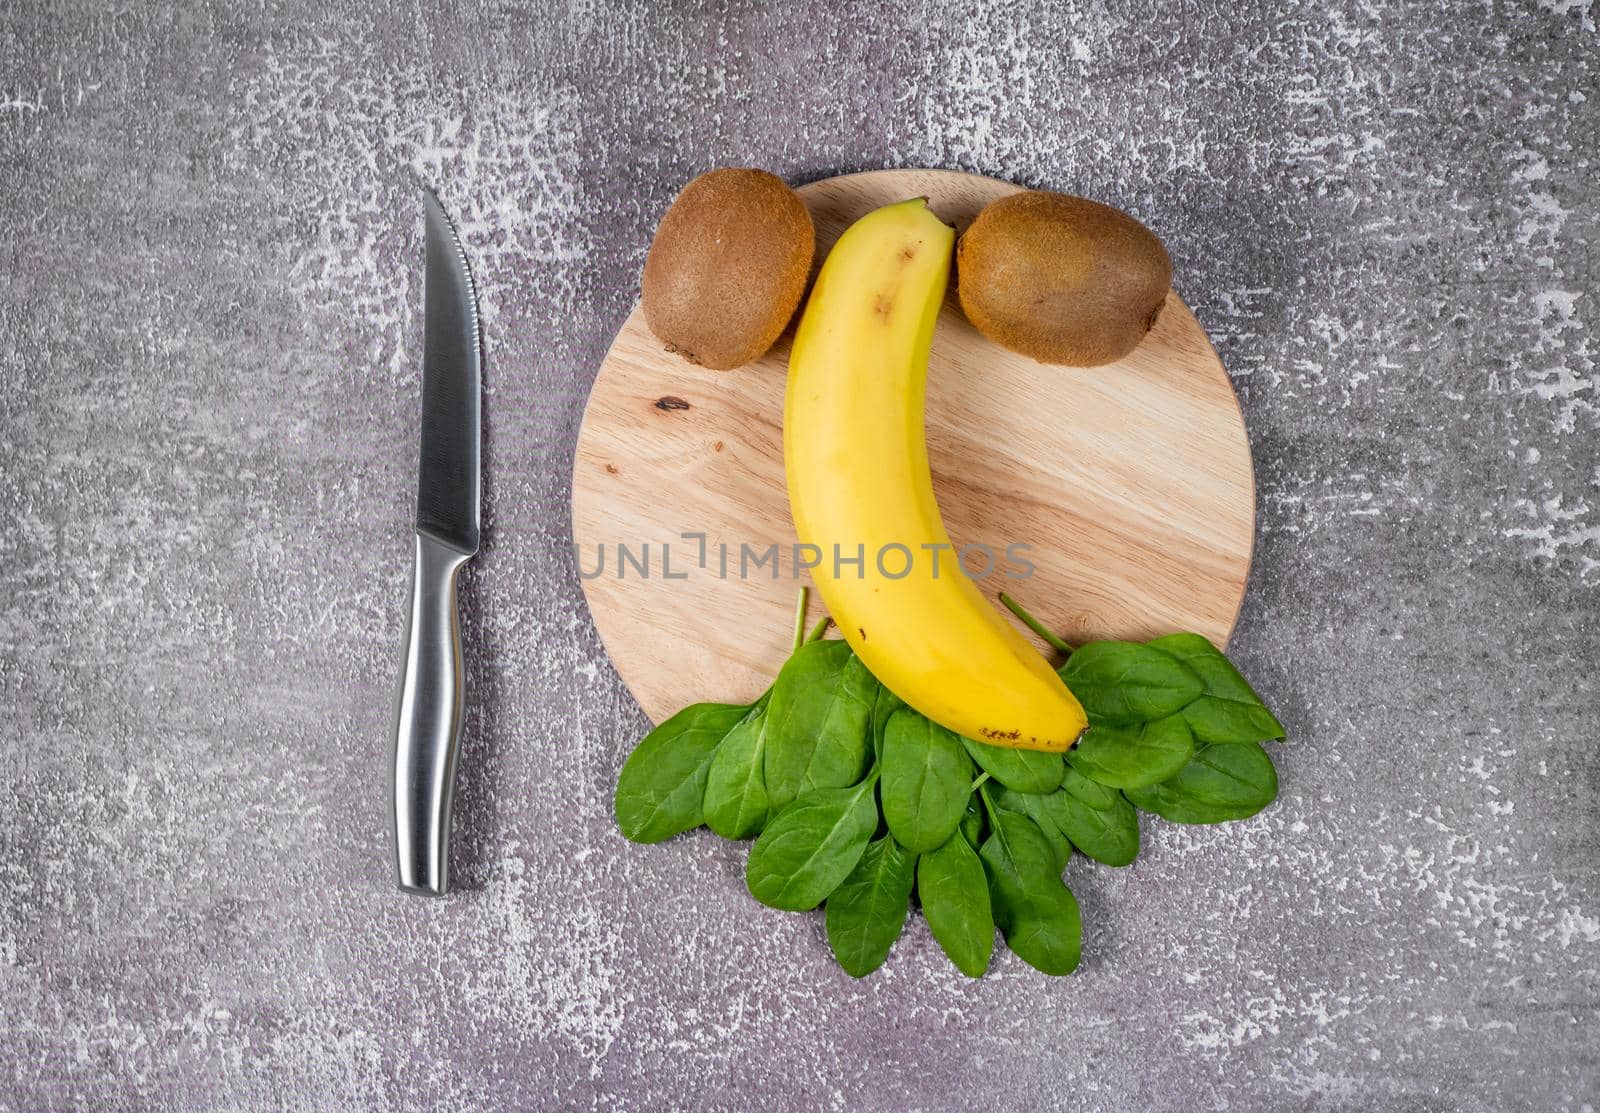 Step 1. Preparation of products for smoothies. Banana, kiwi and spinach on a cutting board.